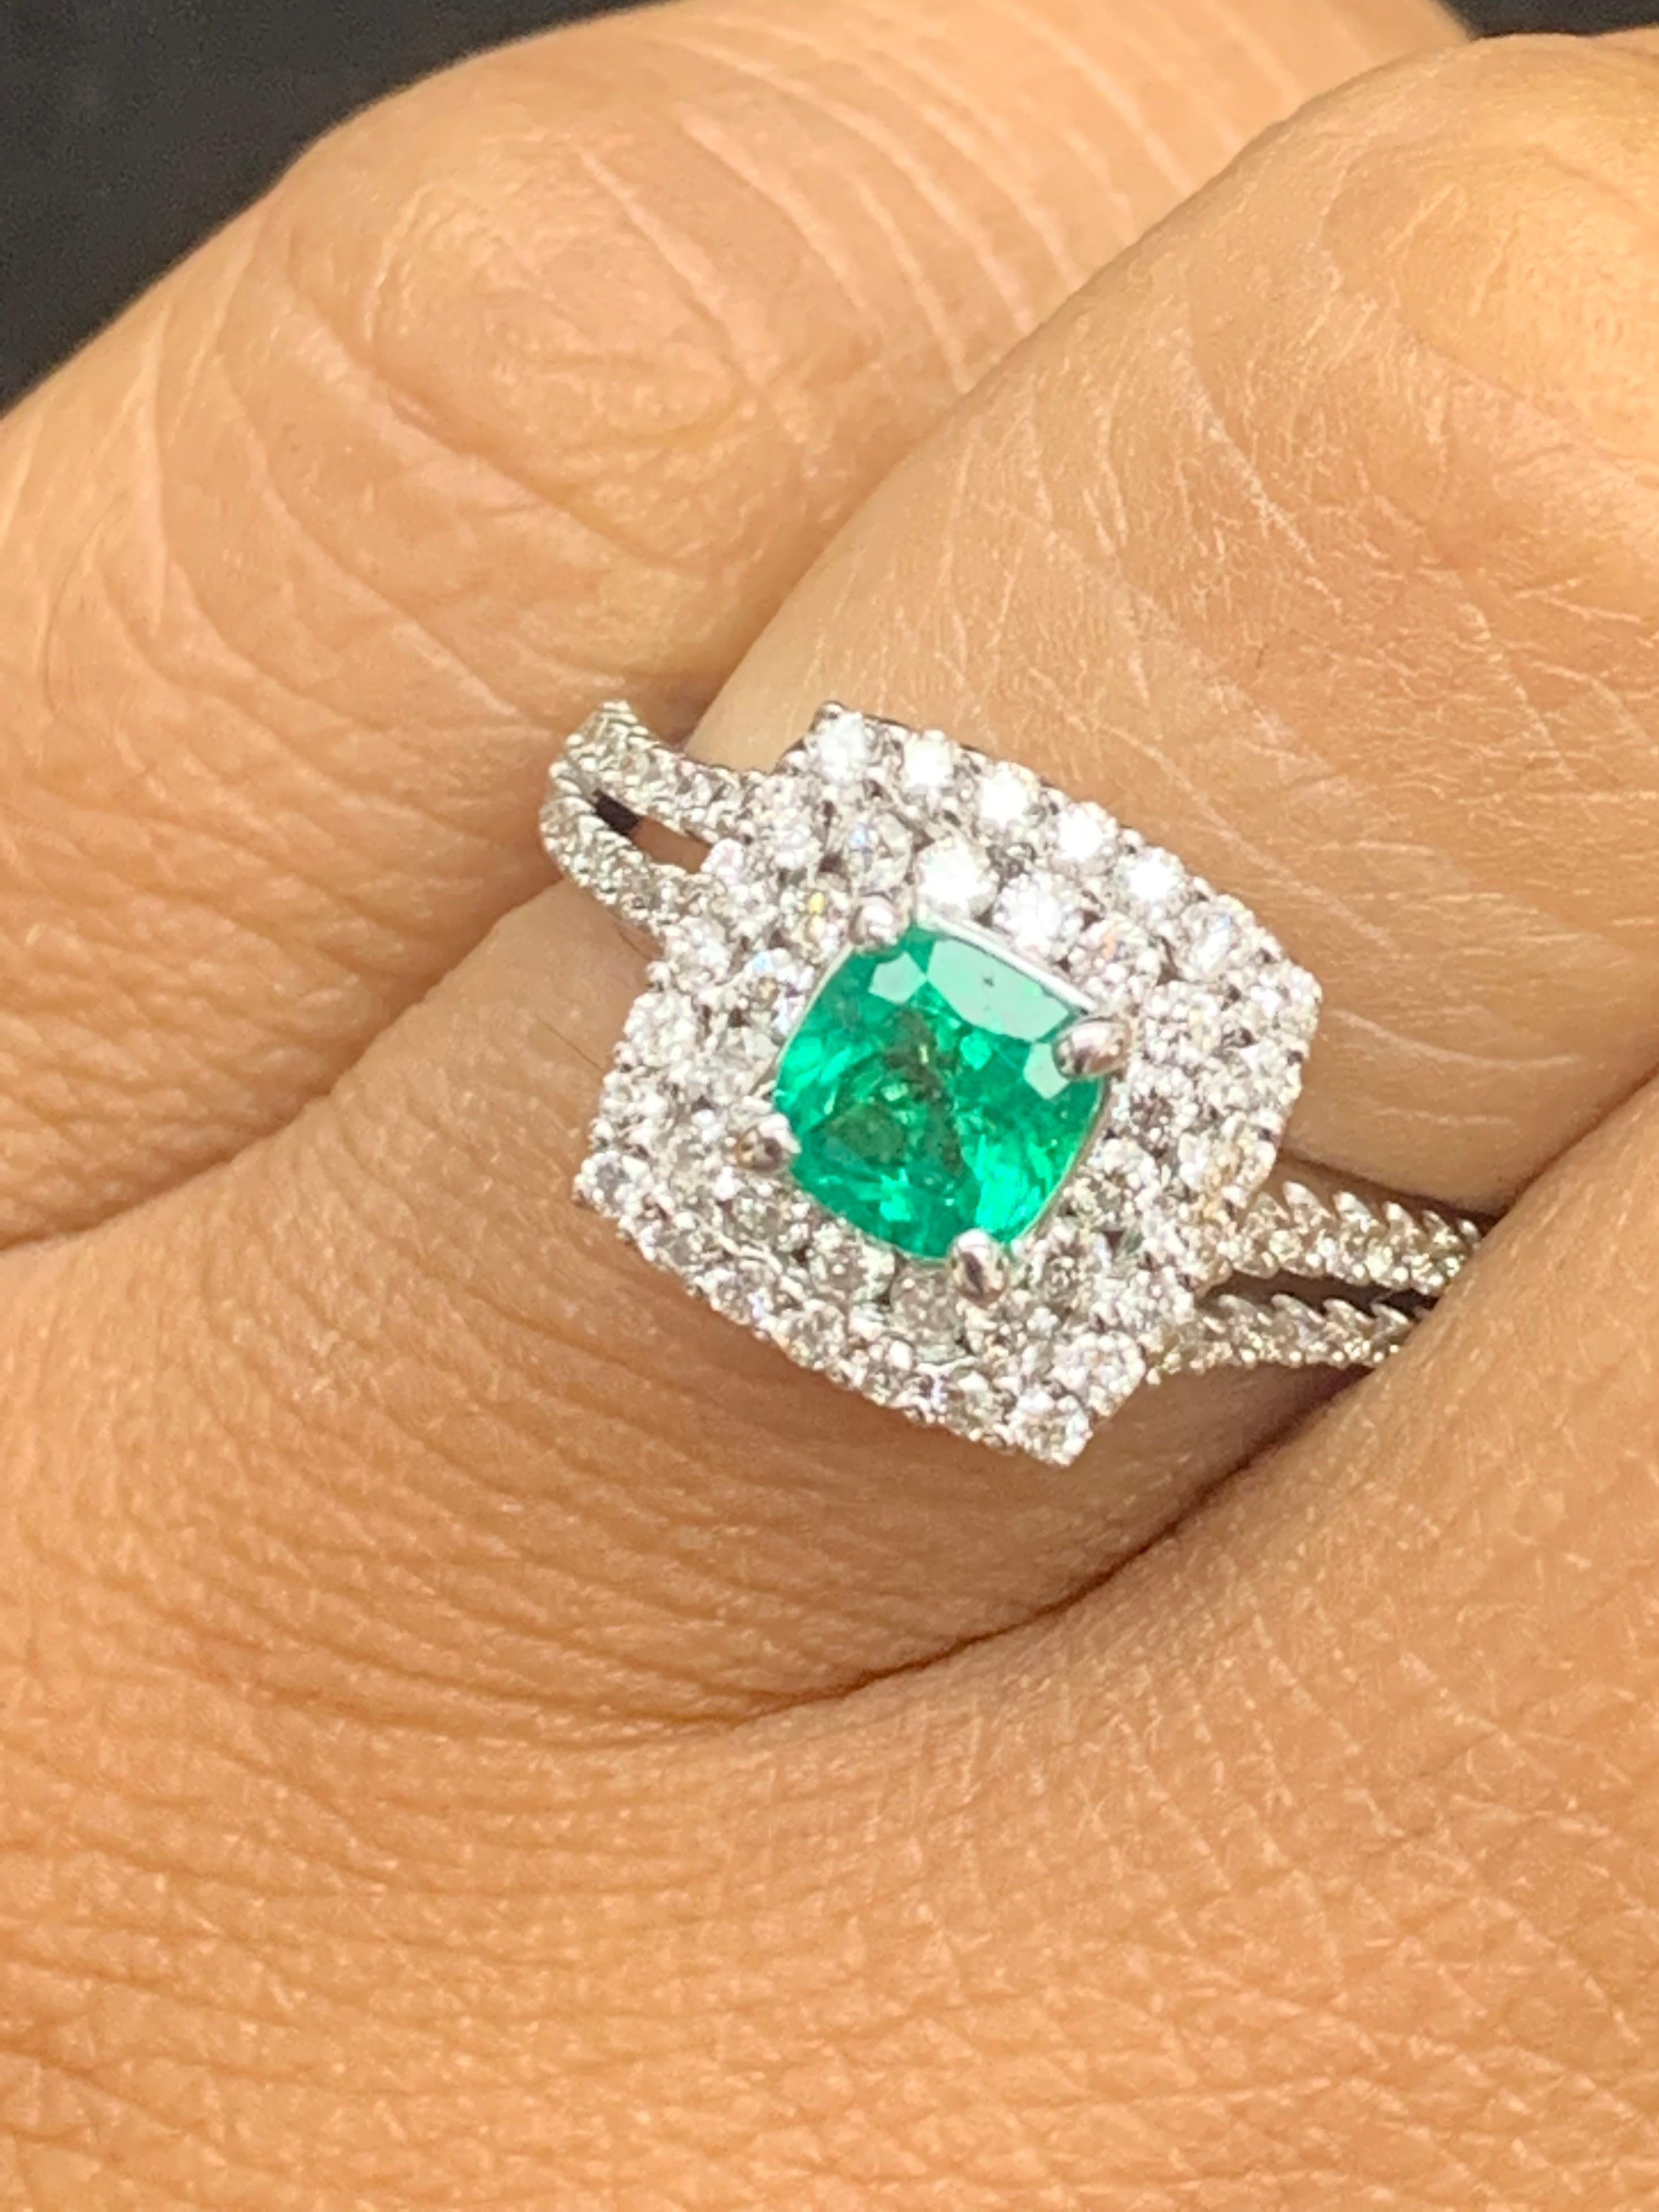 Modern 0.48 Carat Cushion Cut Emerald and Diamond Fashion Ring in 18K White Gold For Sale